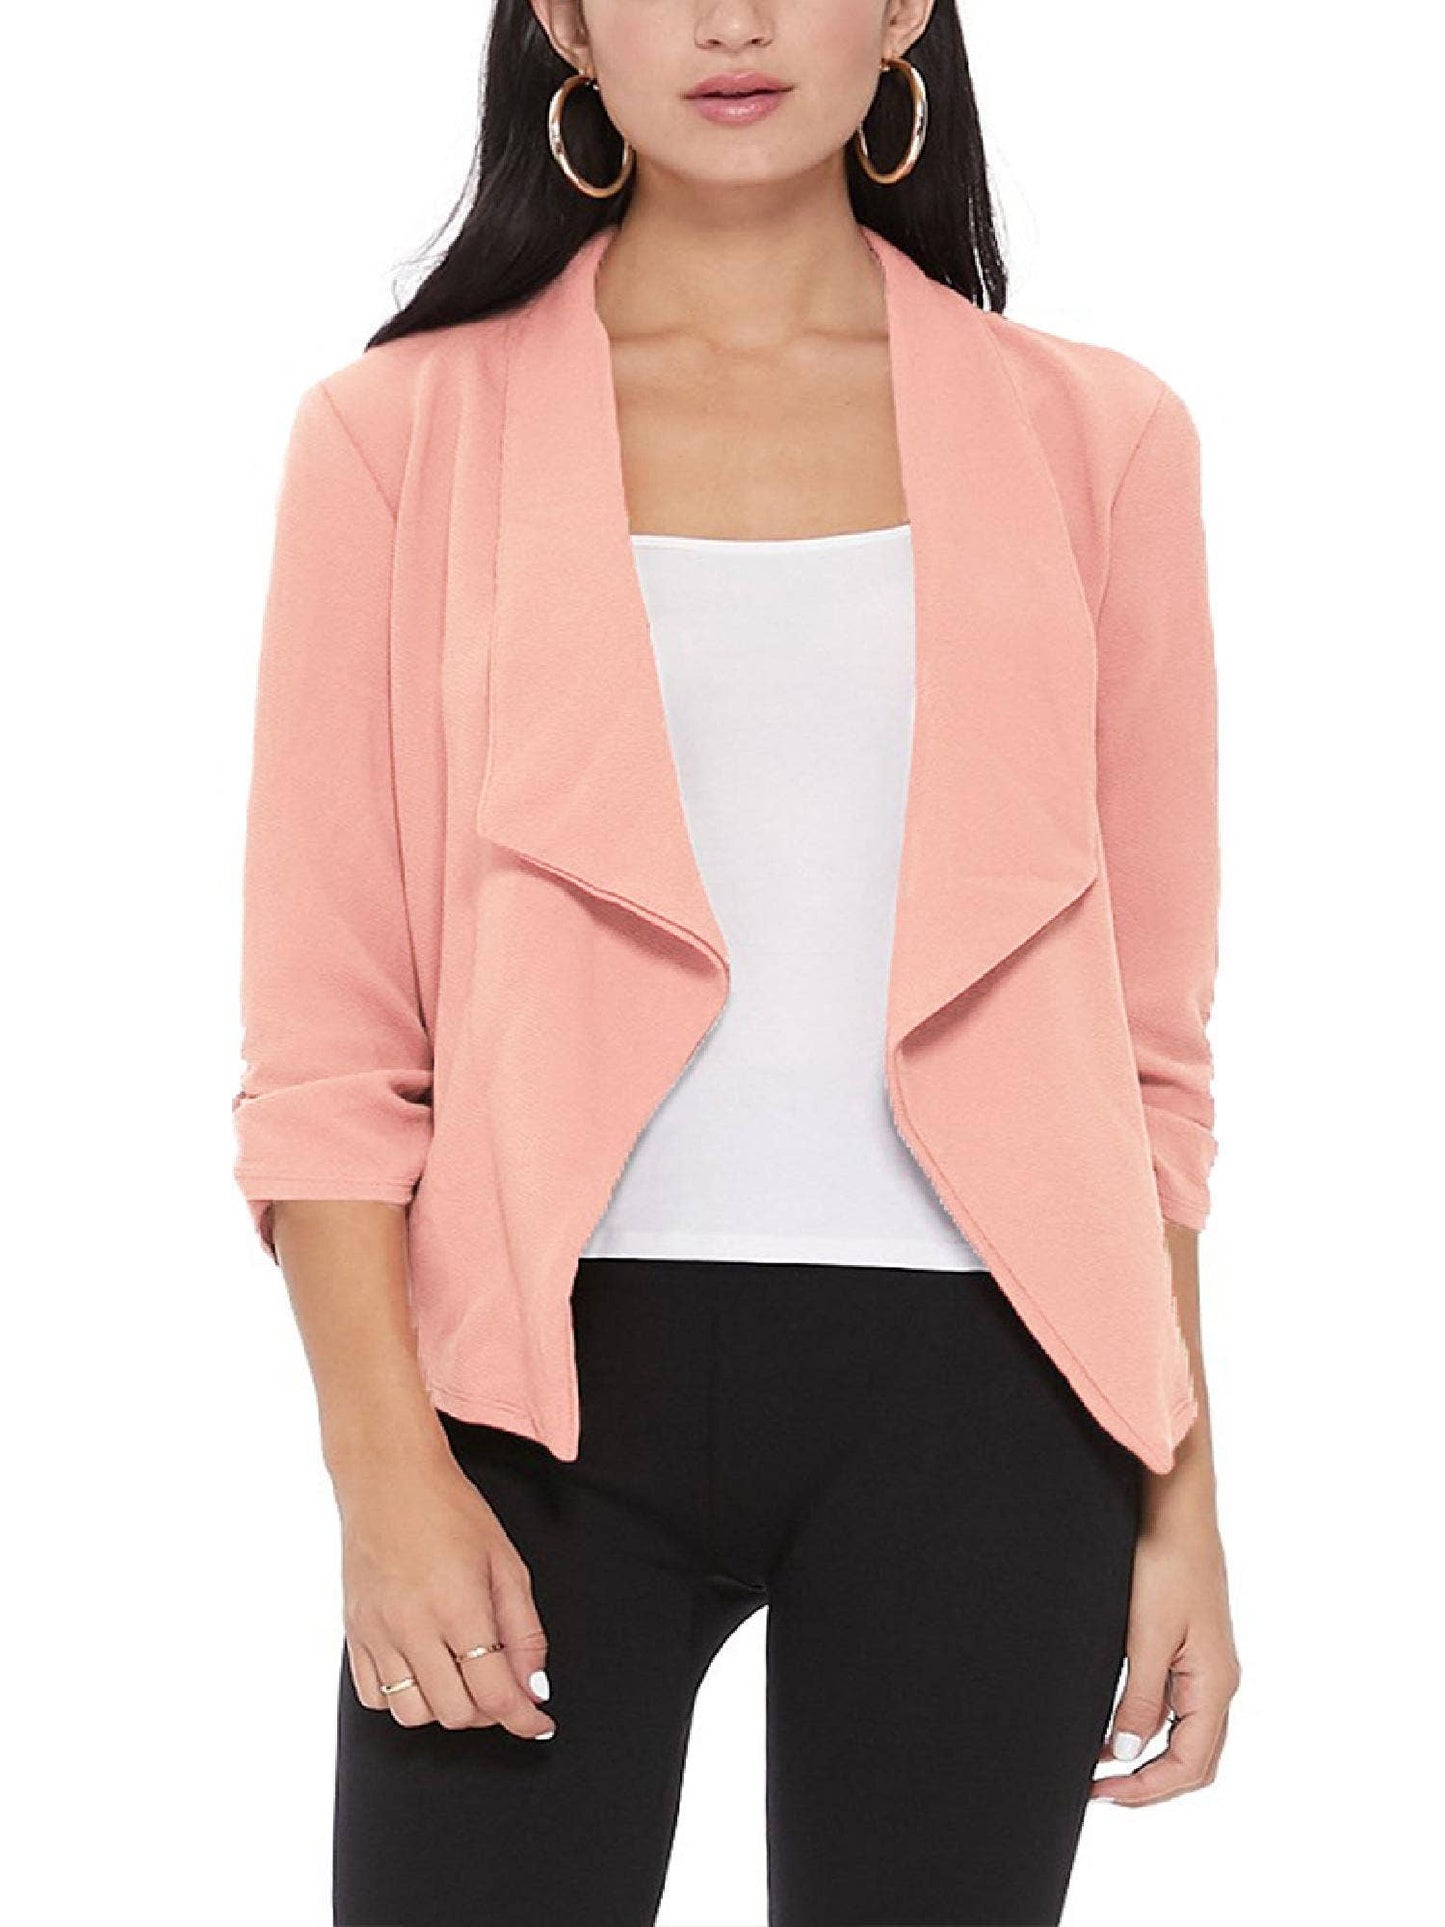 Casual Open Front Slim Fit Draped Solid Blazer Jacket